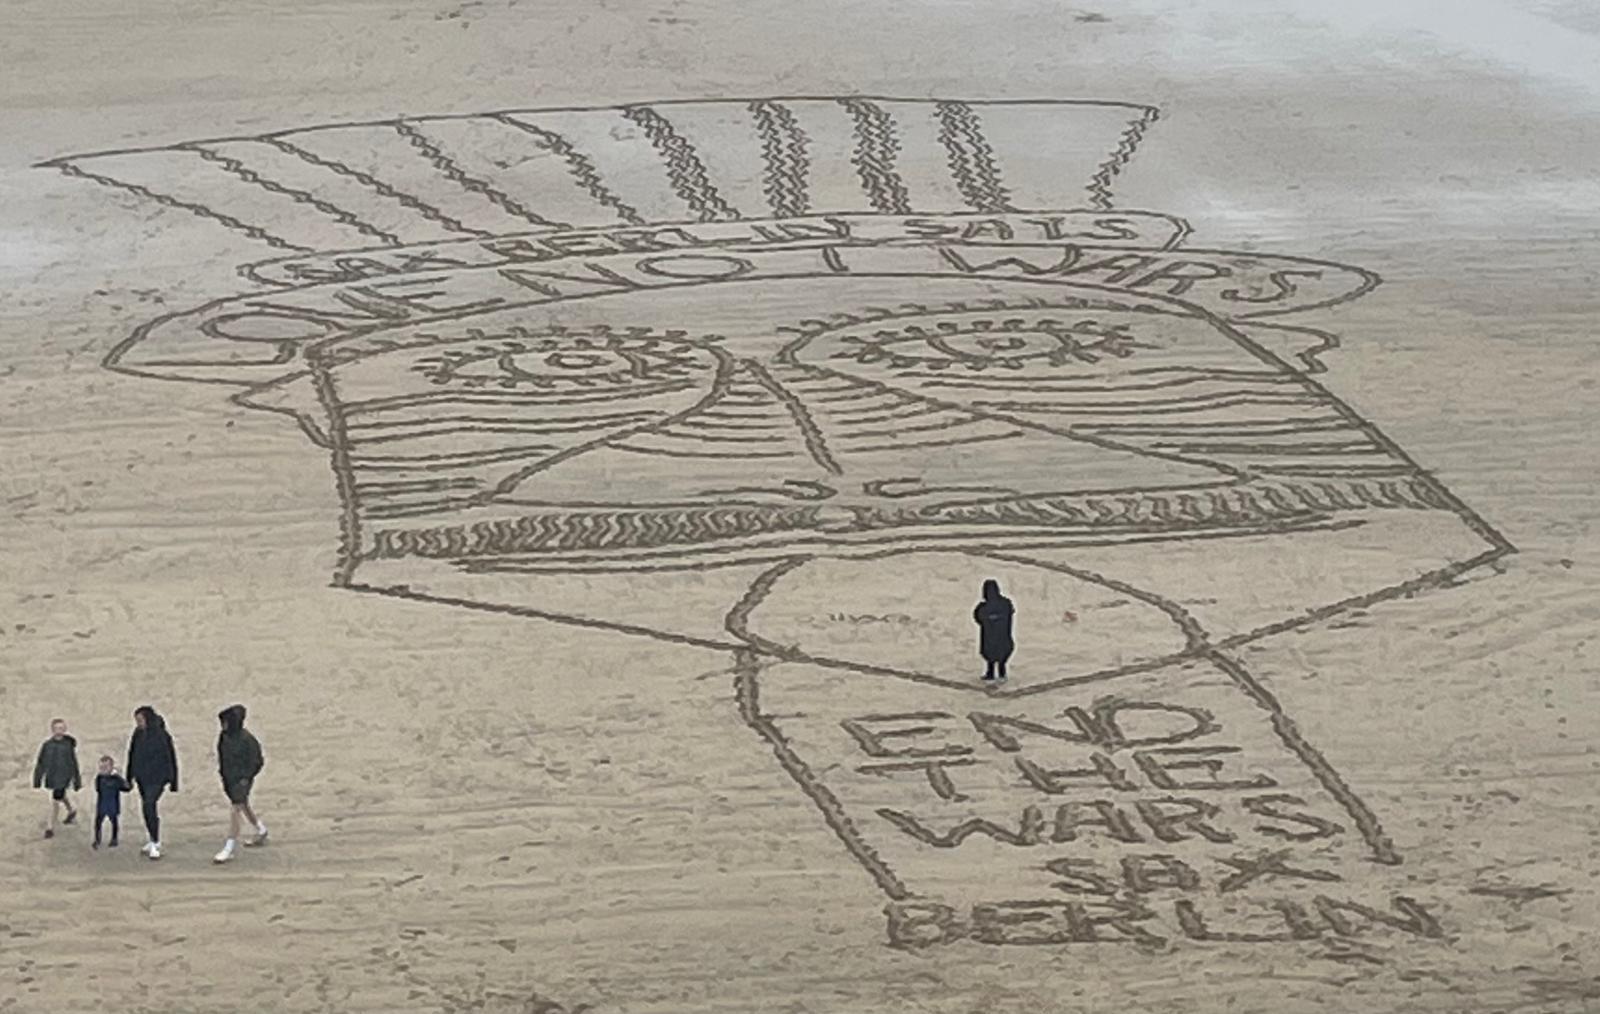 Neo-Expressionism has a justified place in the art pantheon and is currently experiencing a revival on both sides of the Atlantic. The human condition is laid out in this piece which is inspired by Sax’s Sand Art on the wild Atlantic coast beaches